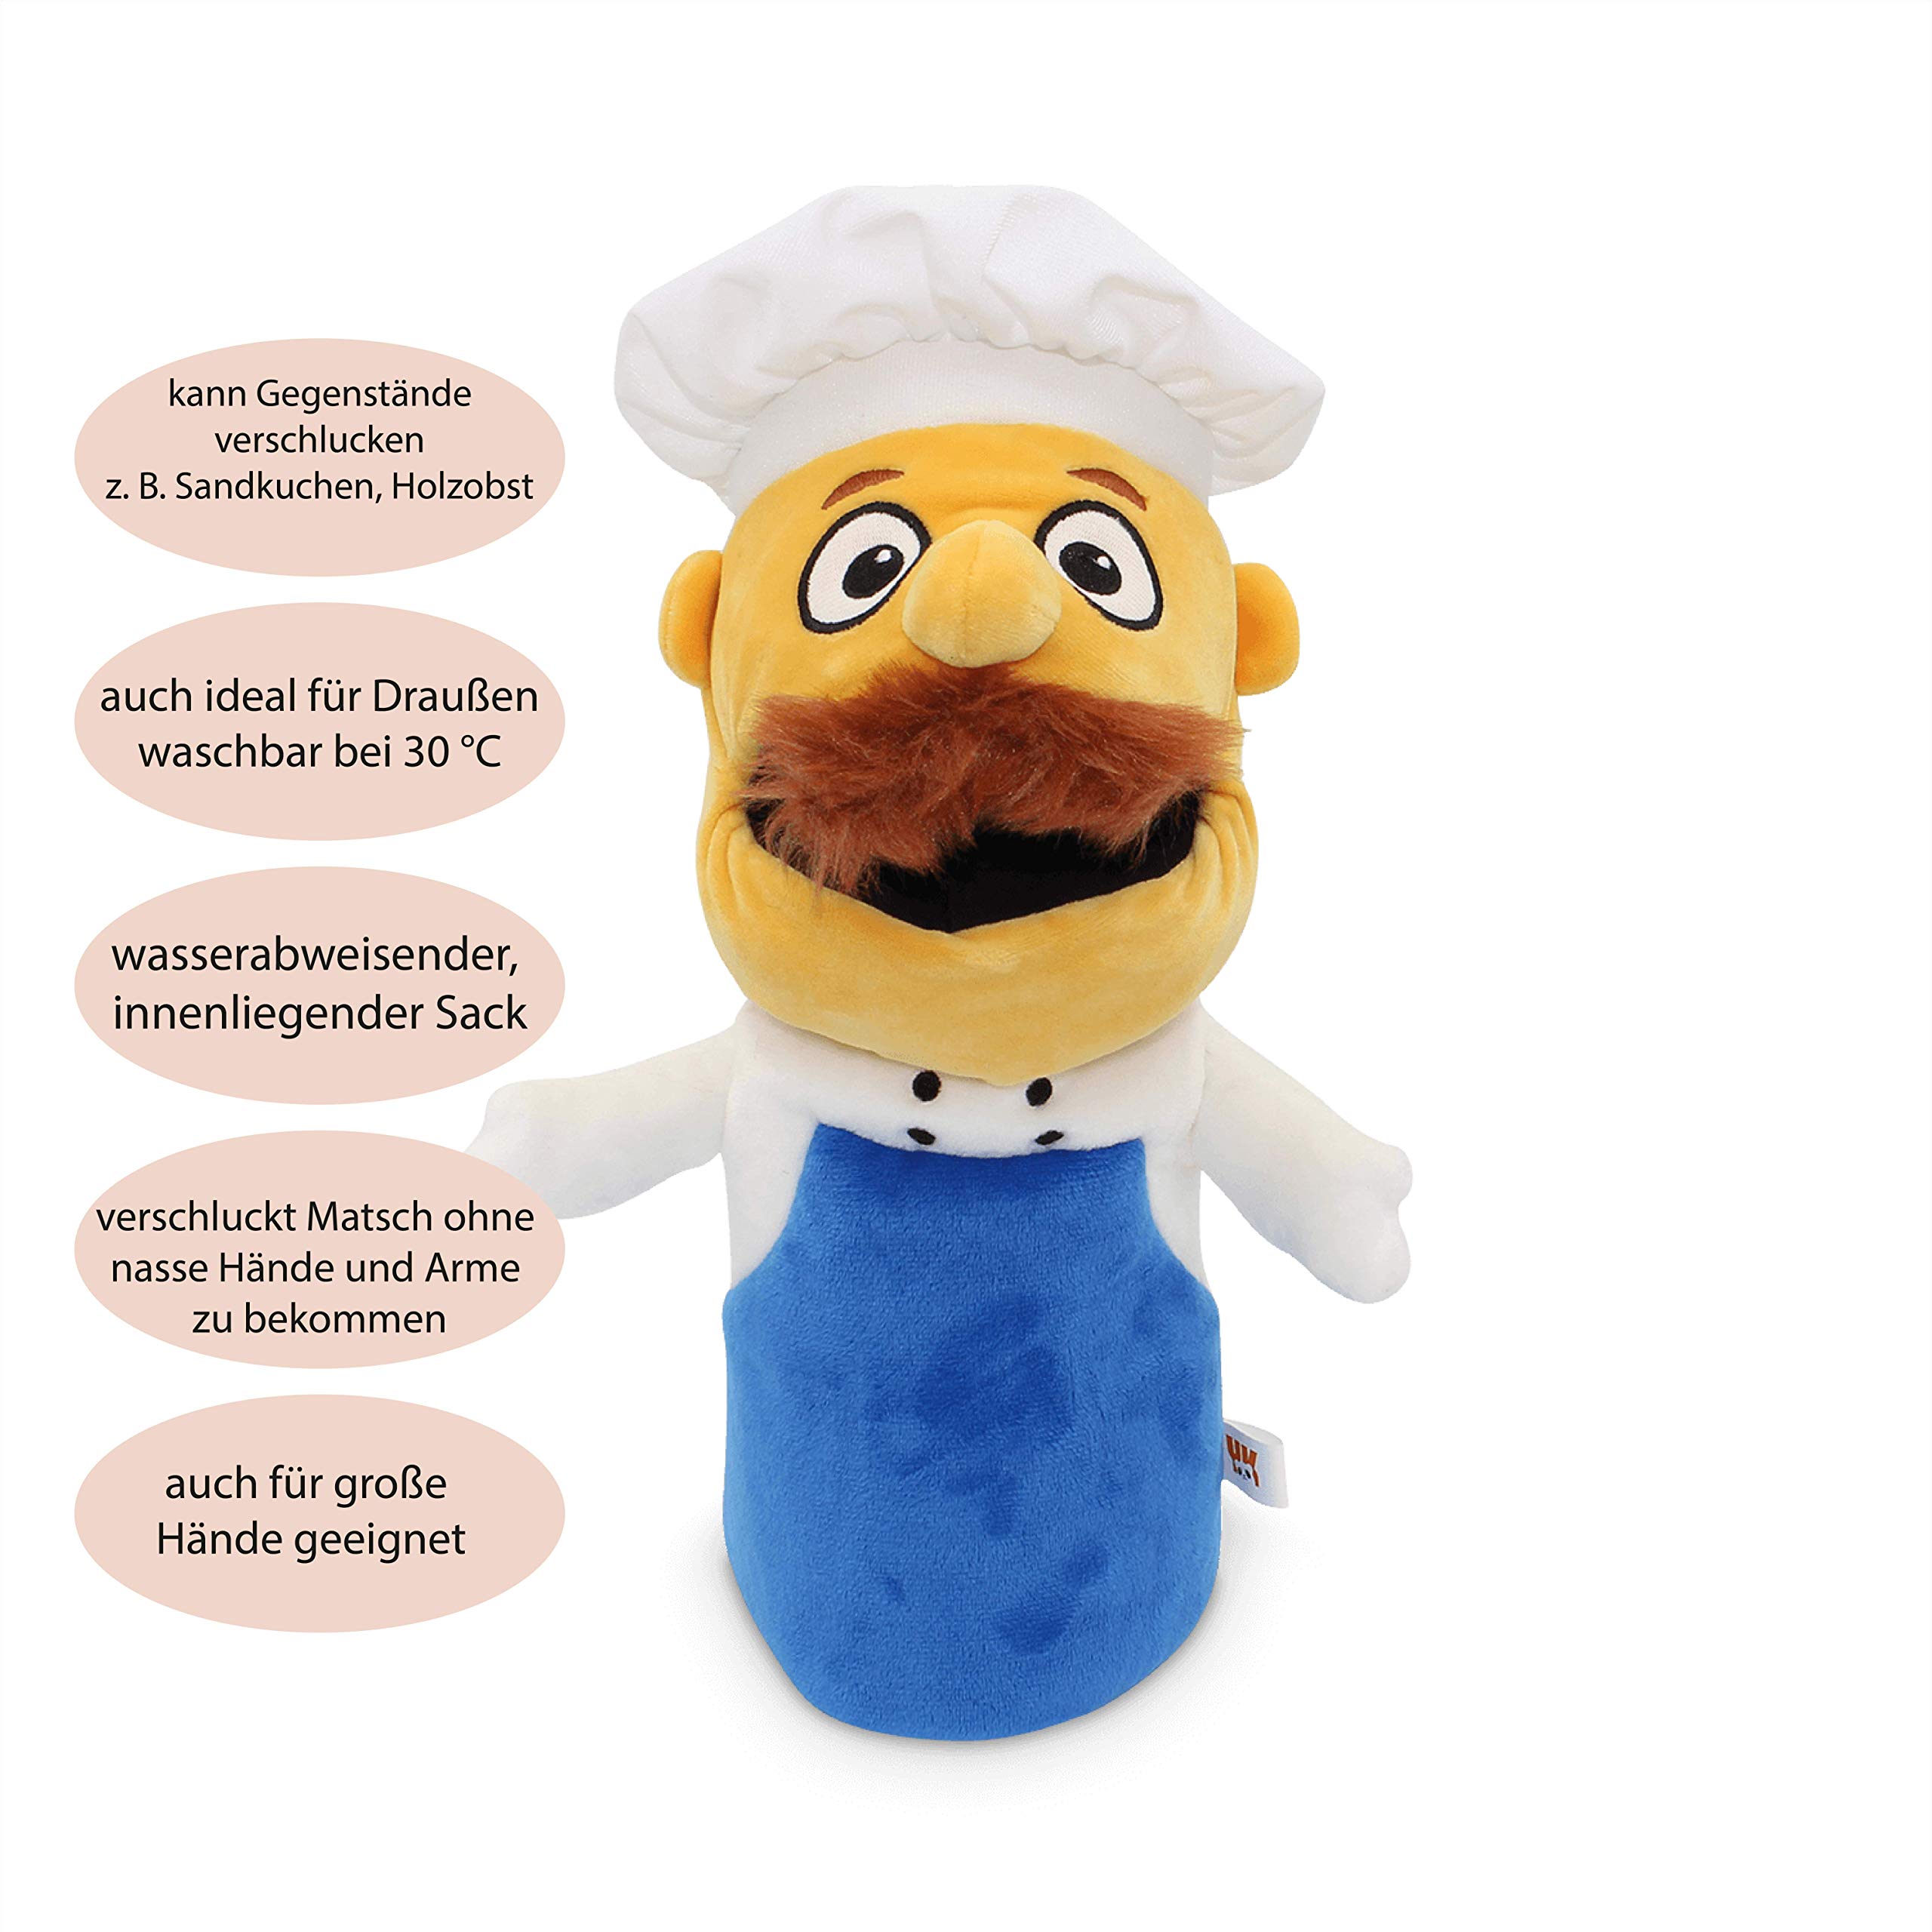 ben luthi recommends chef peepee puppet amazon pic